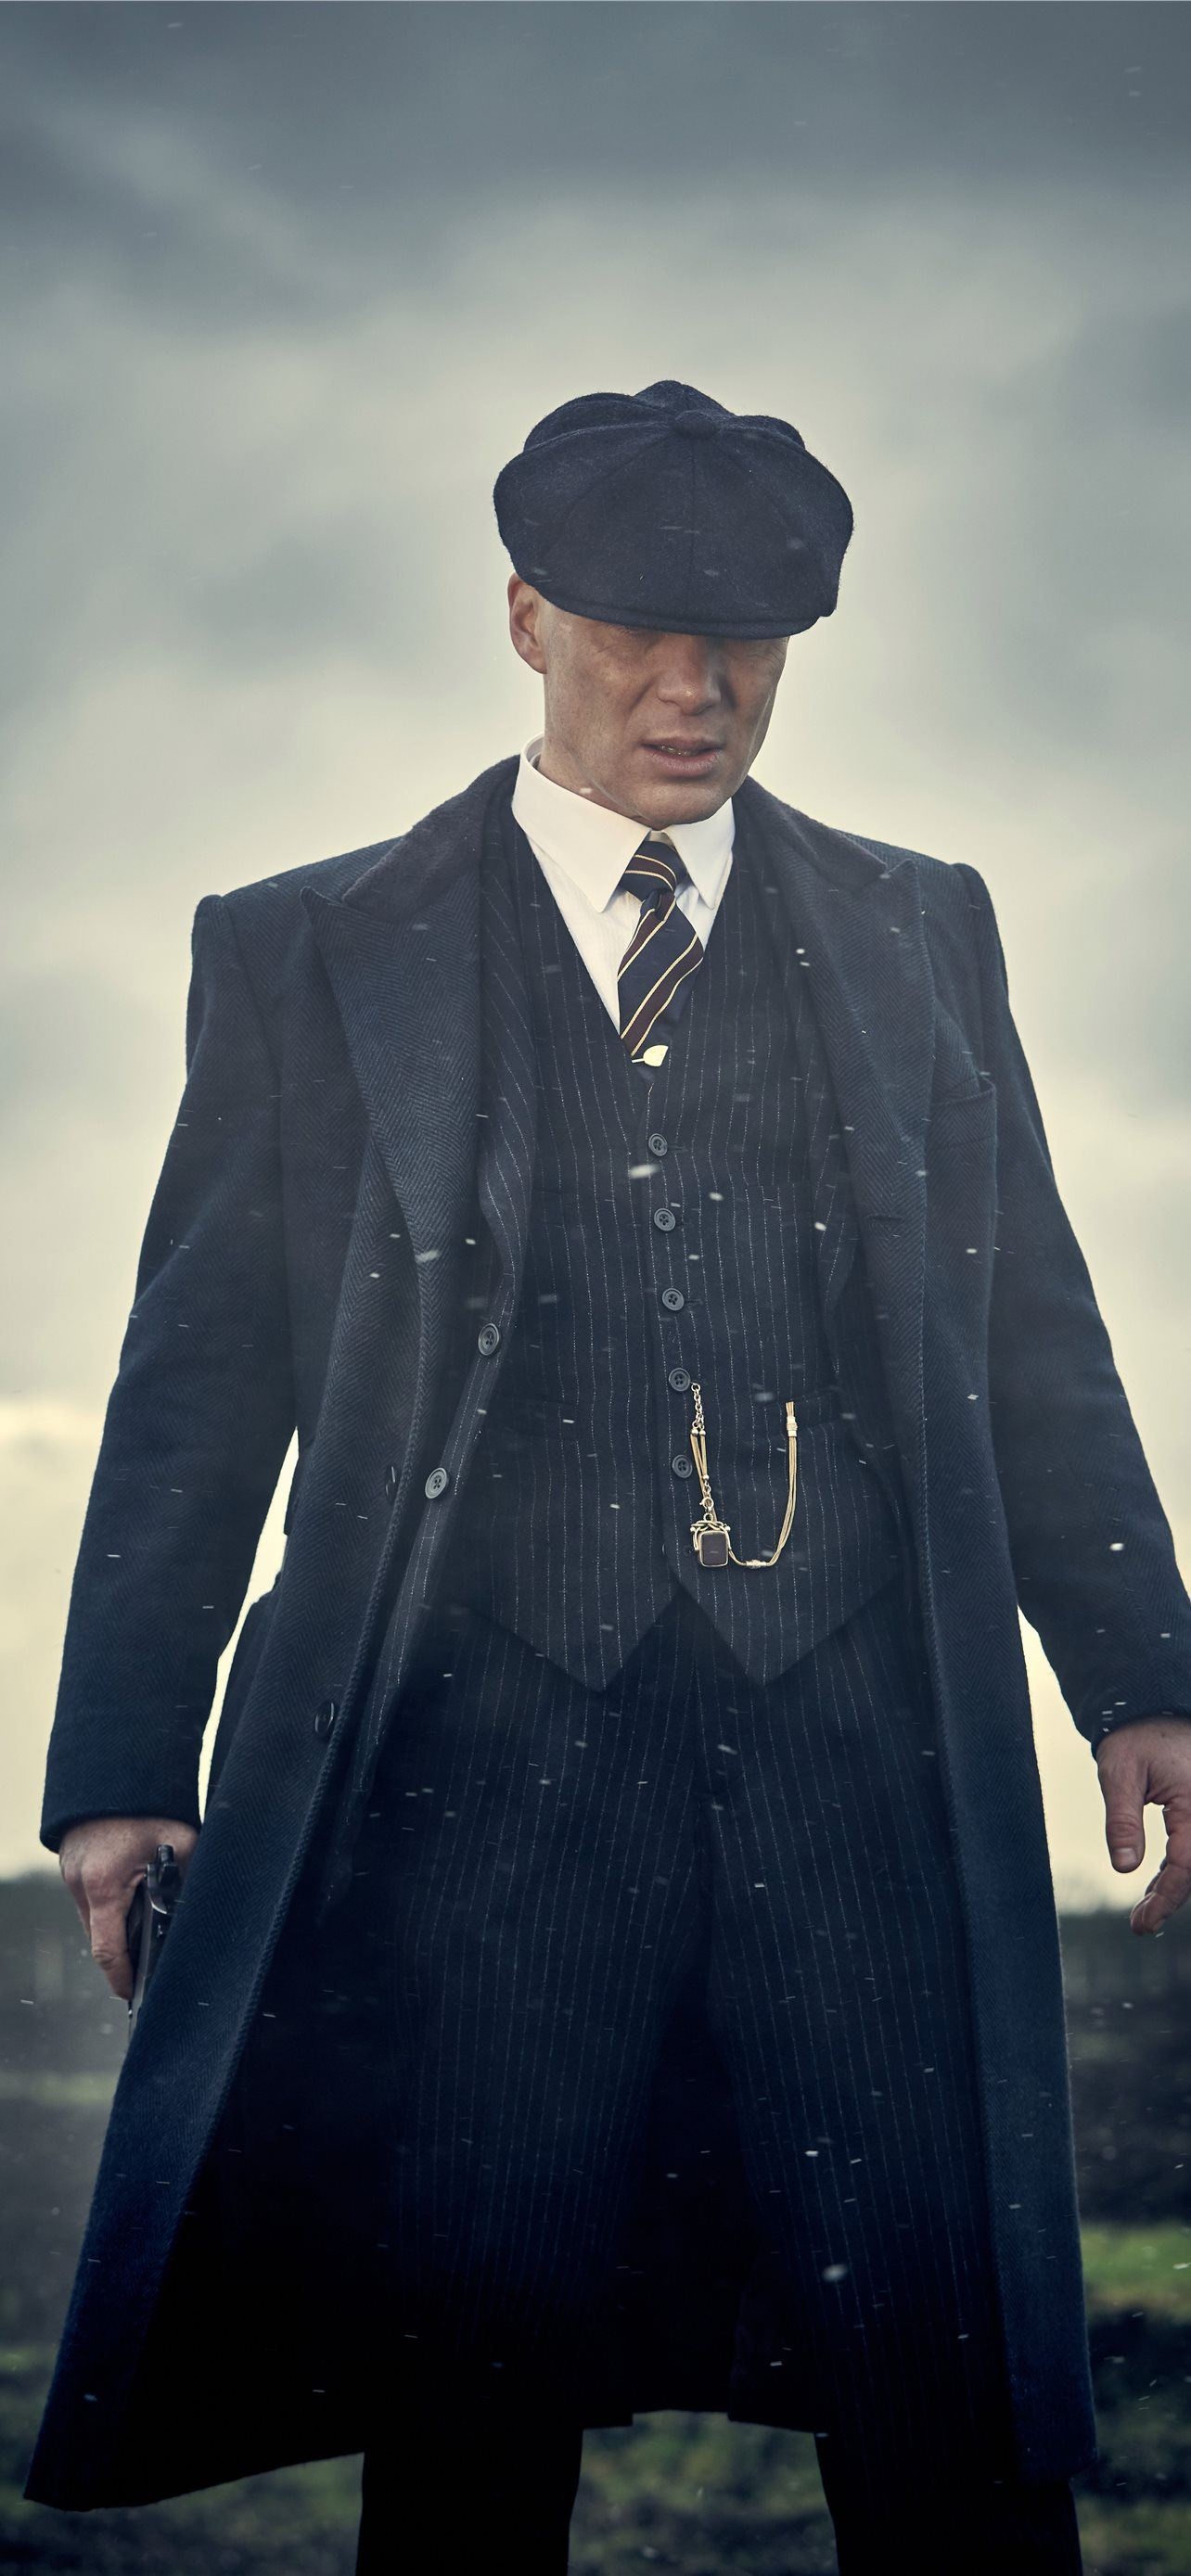 Latest Peaky Blinders, iPhone HD wallpapers, Stylish designs, Mobile backgrounds, 1290x2780 HD Handy